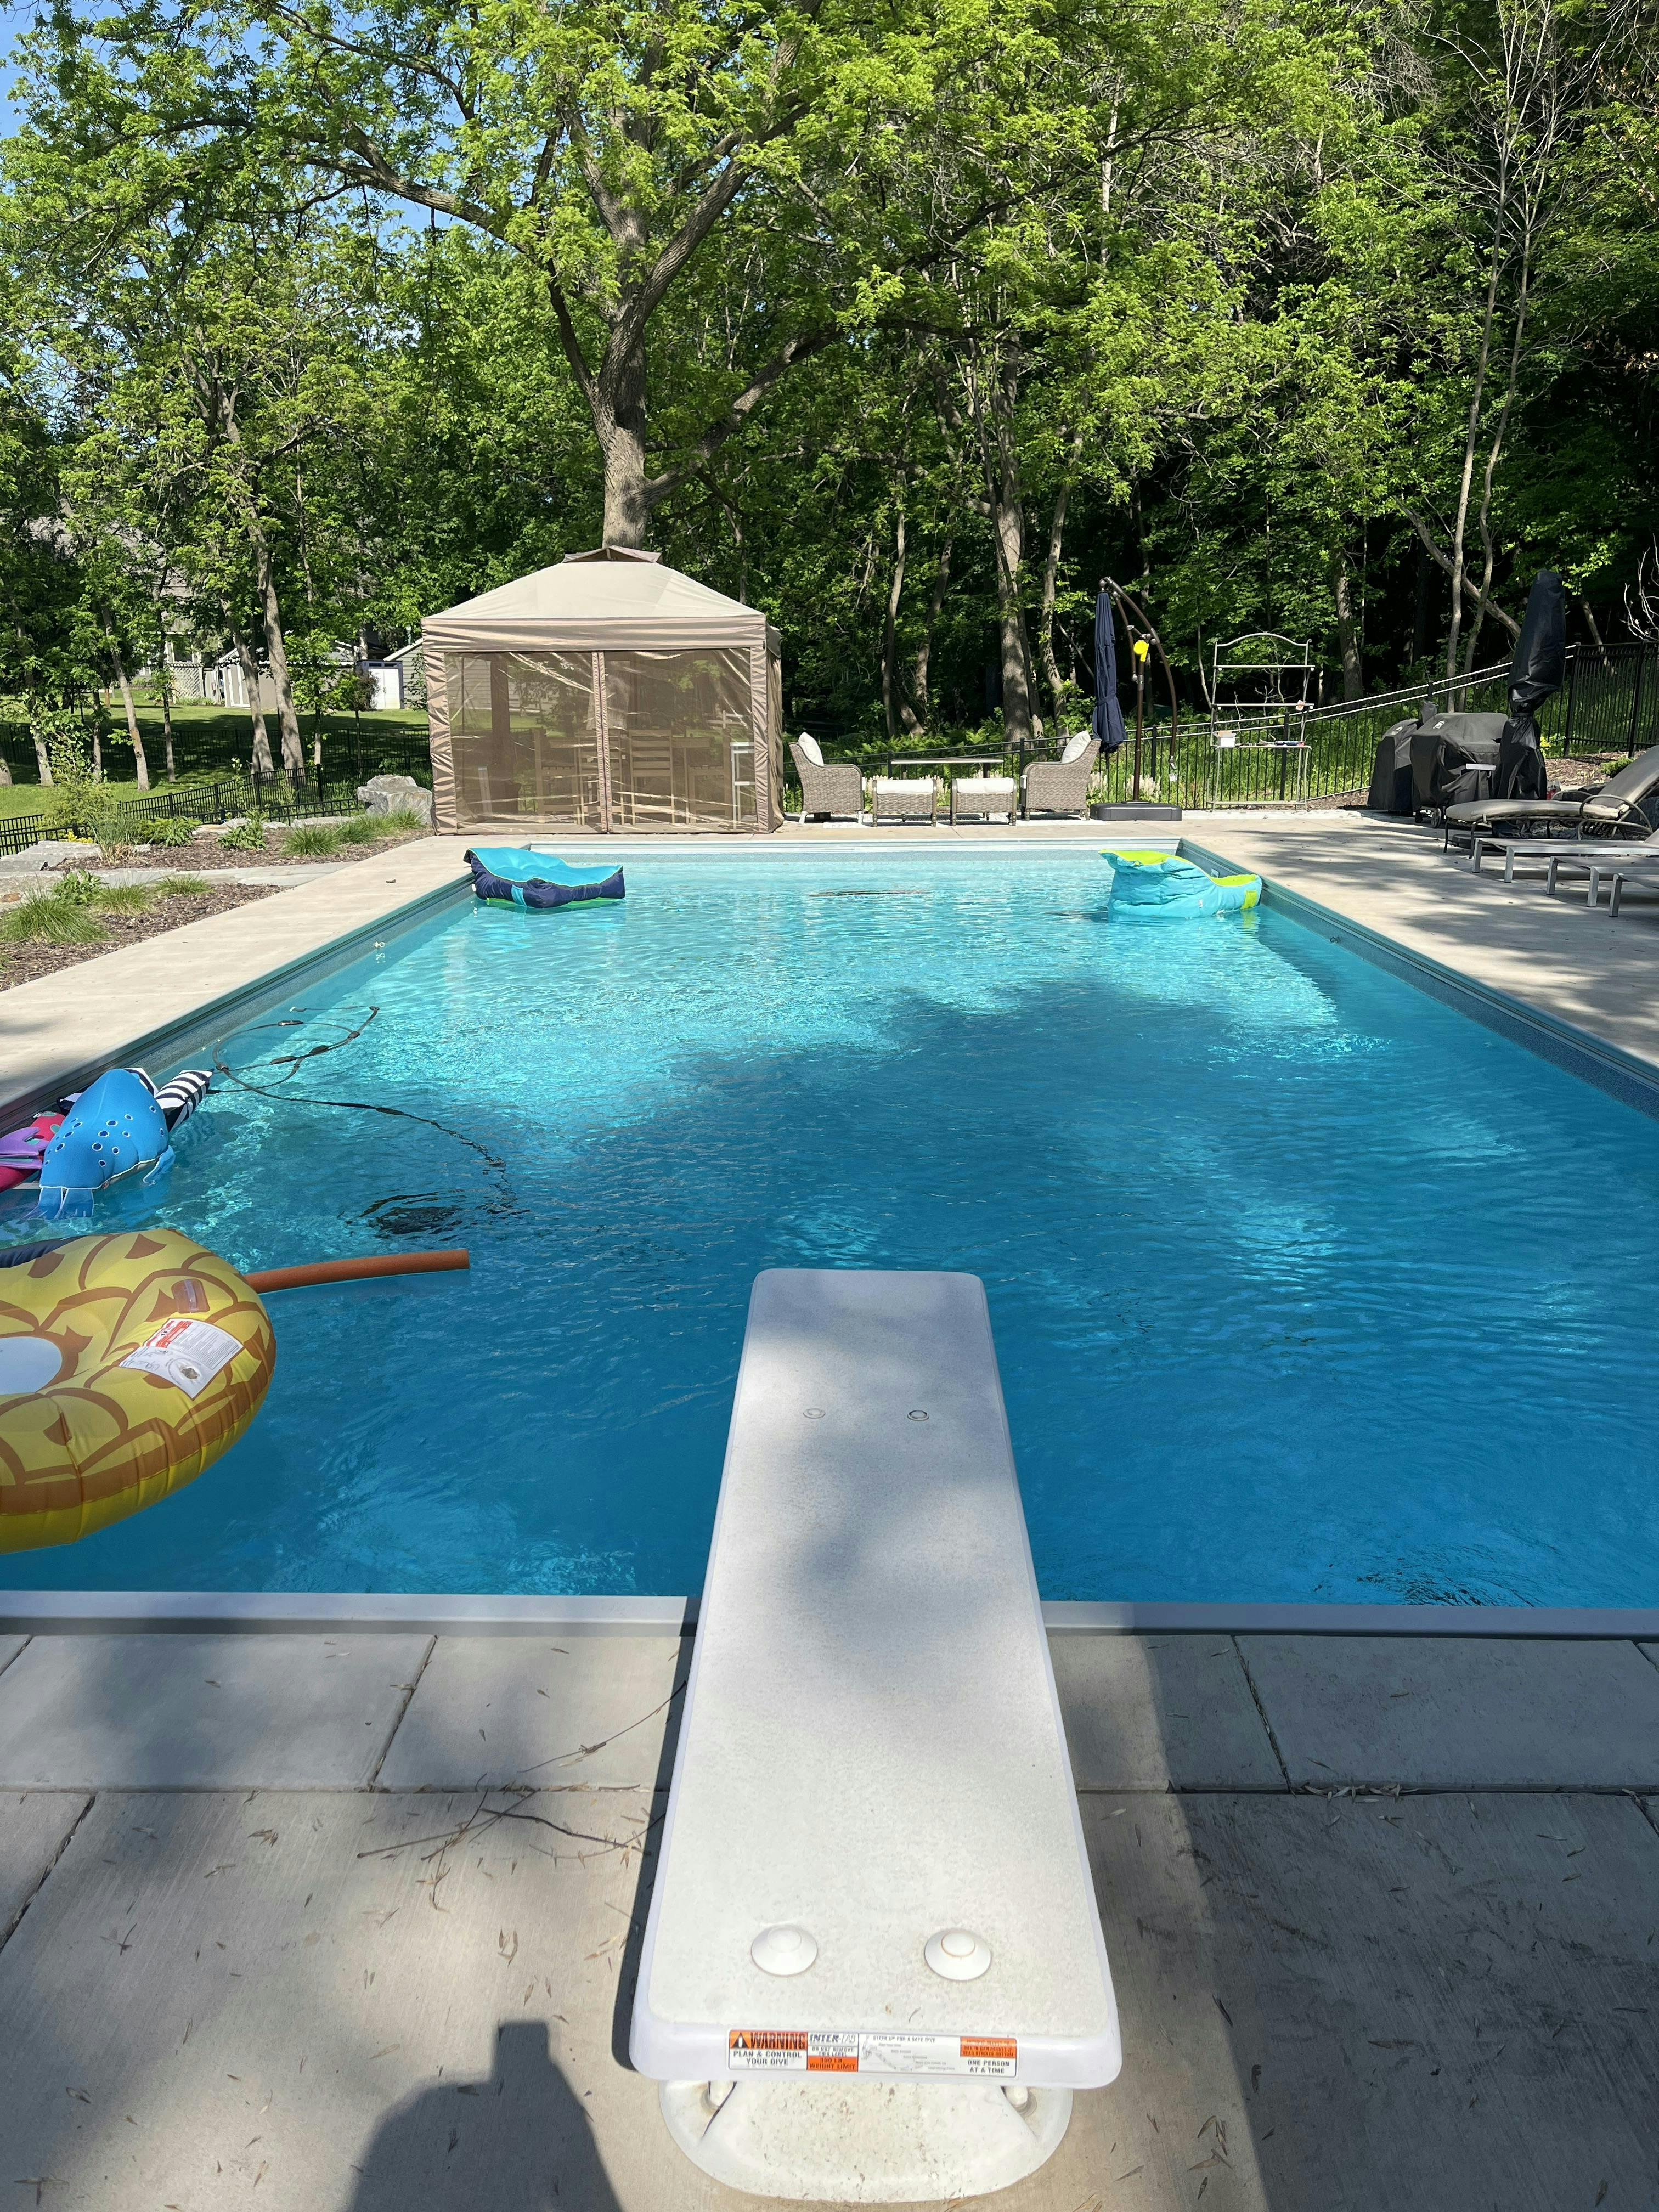 Large, private, heated pool, gazebo, loungers, seating